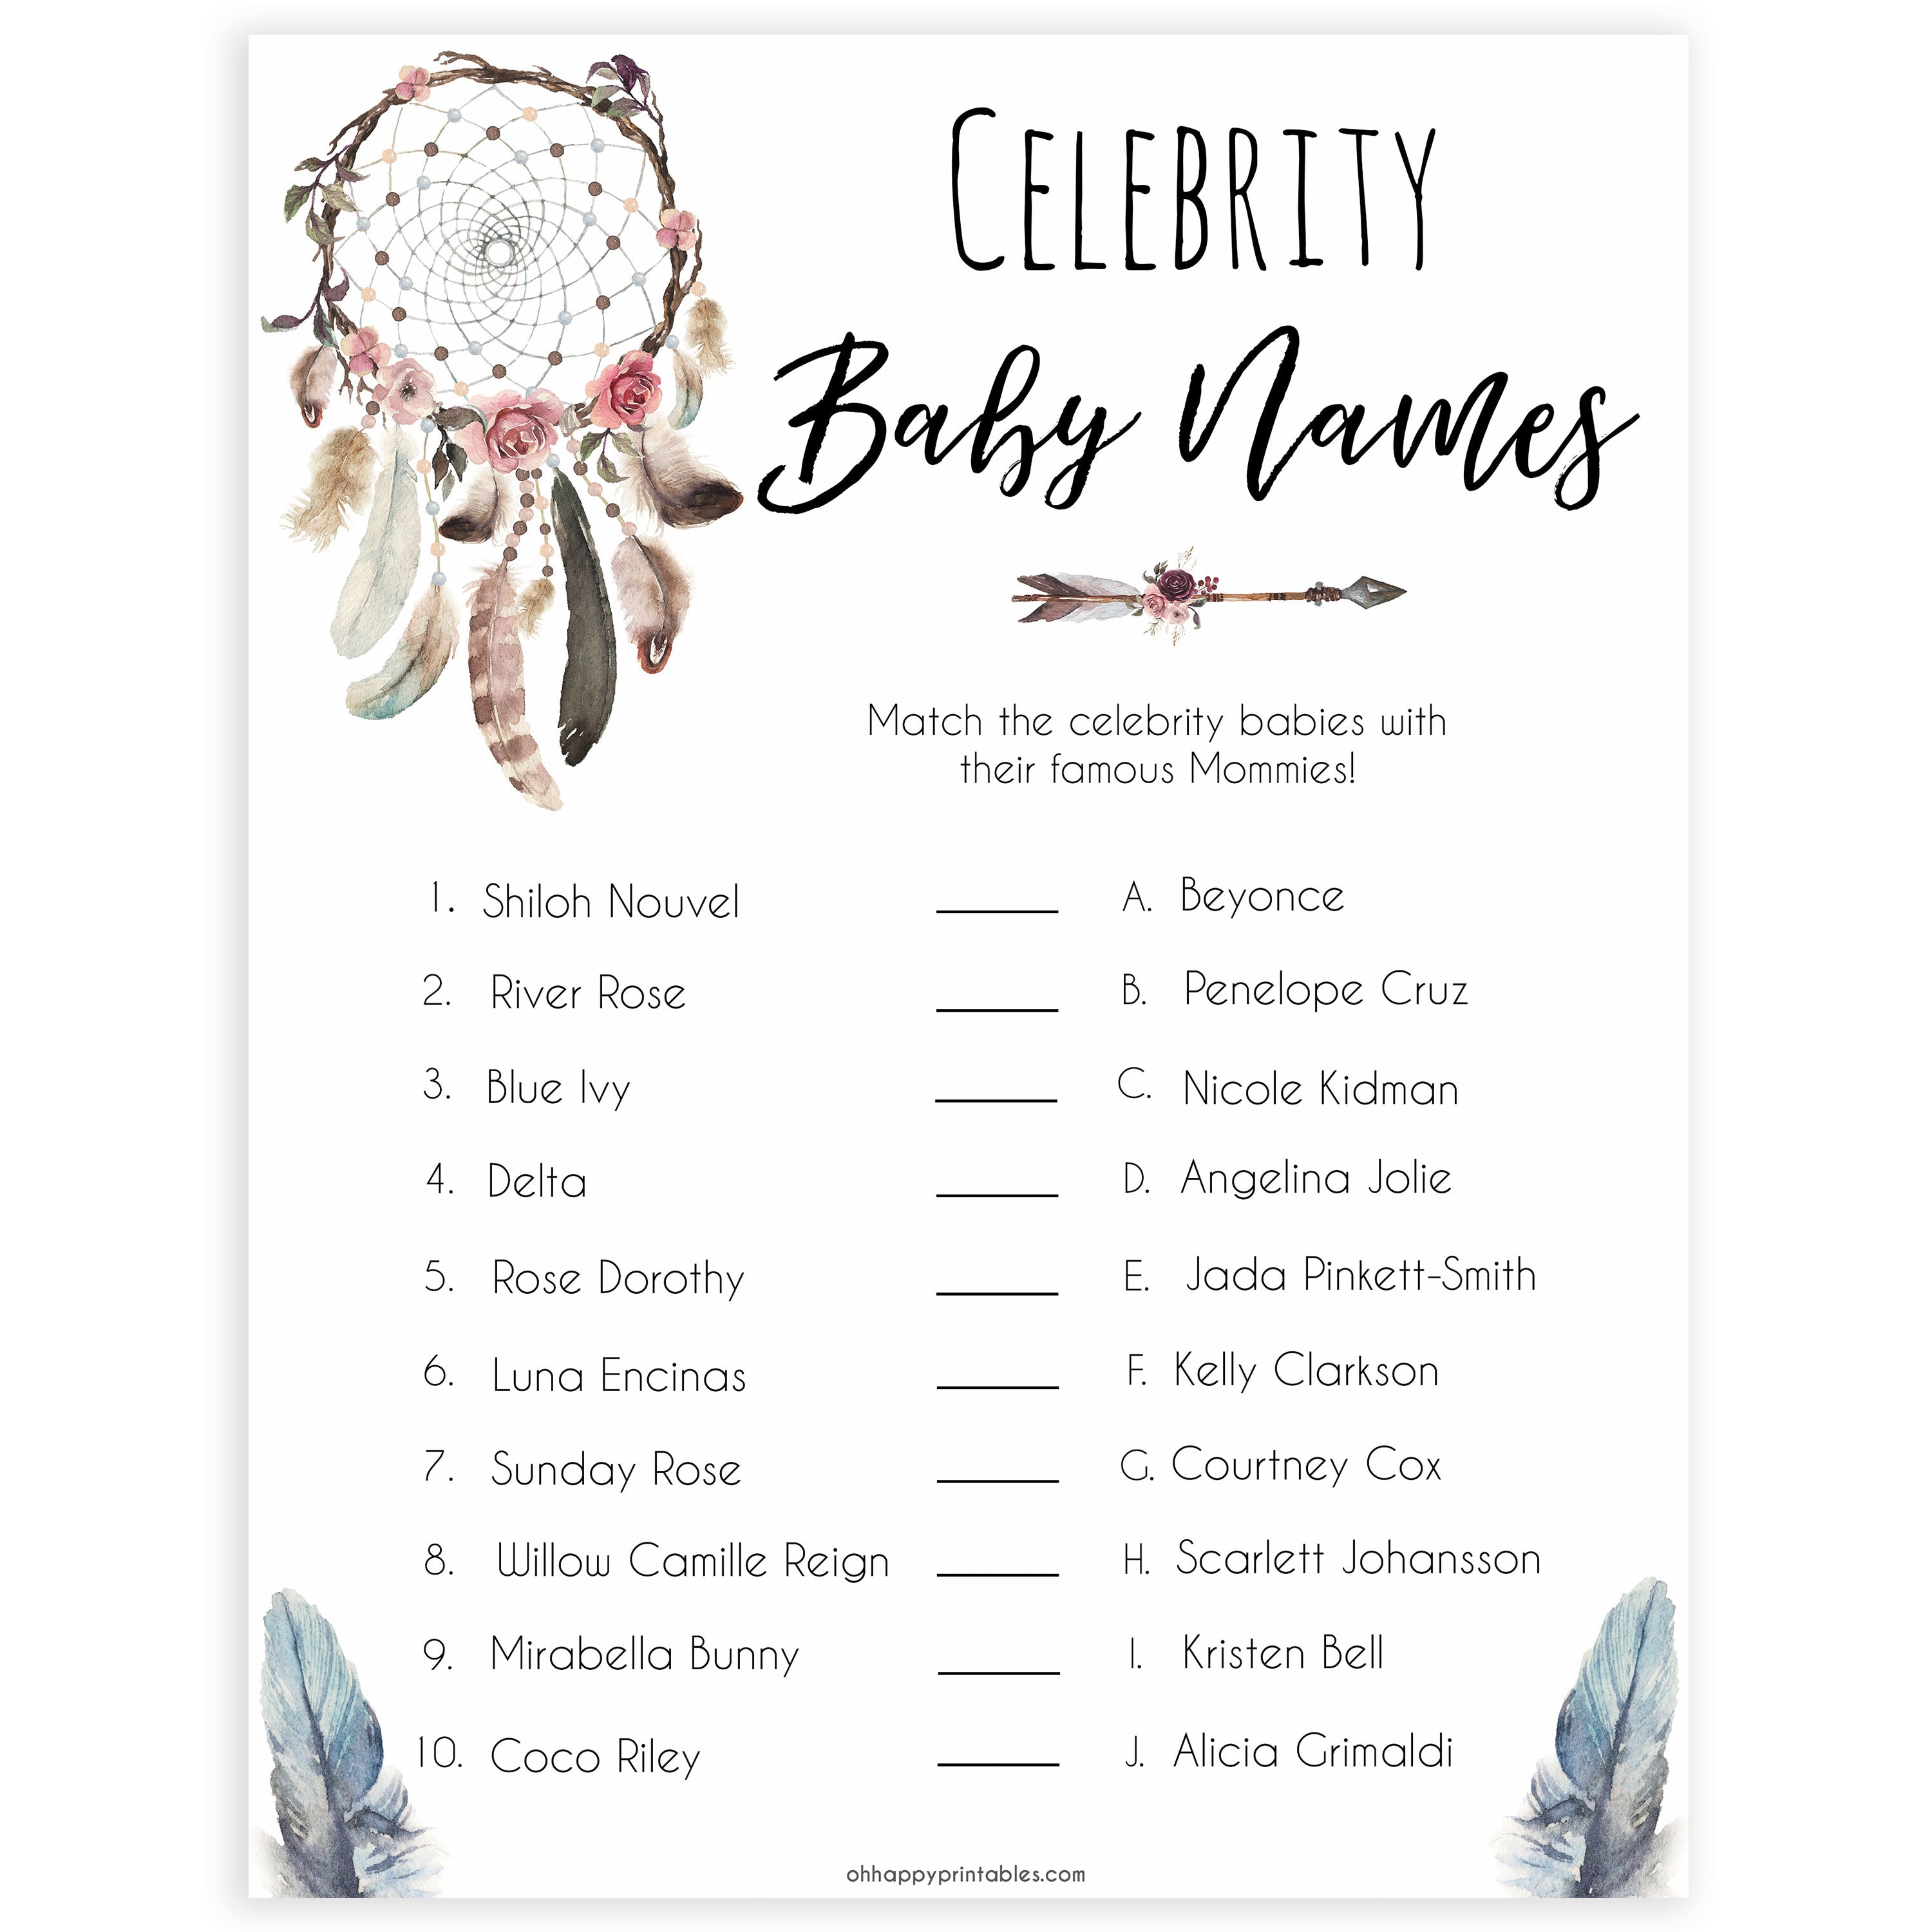 Boho baby games, celebrity baby names baby game, fun baby games, printable baby games, top 10 baby games, boho baby shower, baby games, hilarious baby games